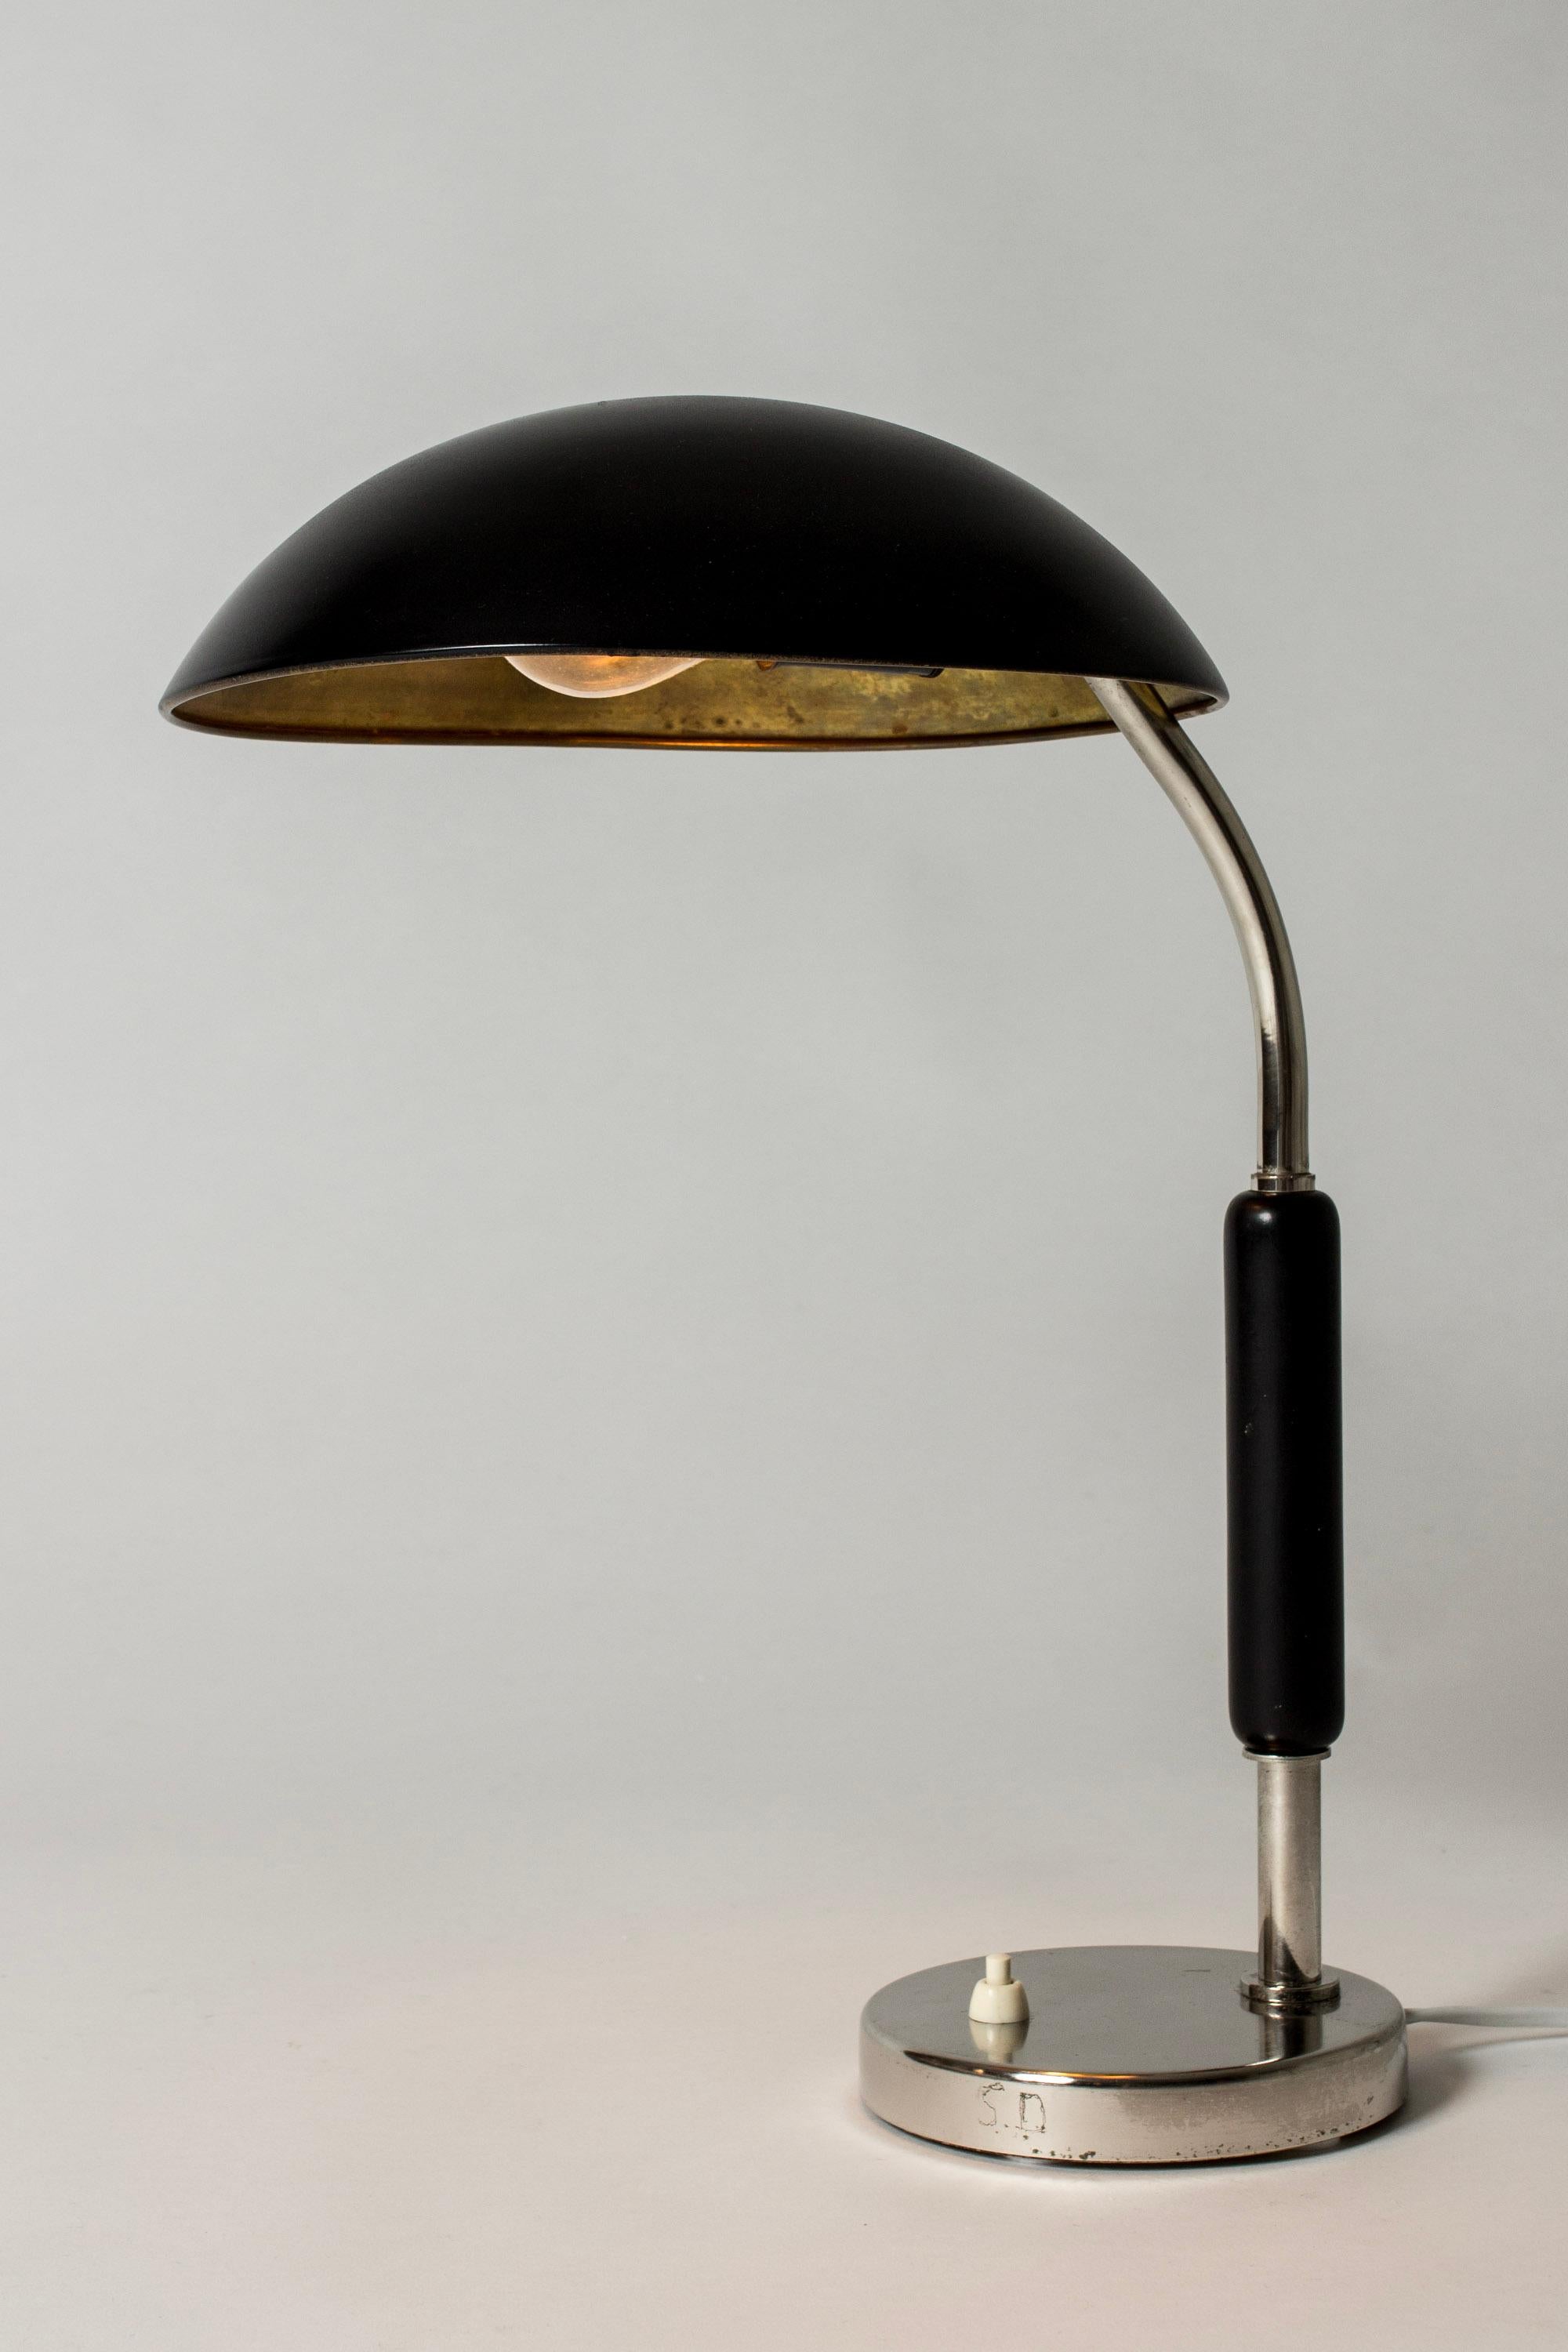 Metal Vintage Functionalist Table or Desk Lamp from ASEA, Sweden, 1930s For Sale